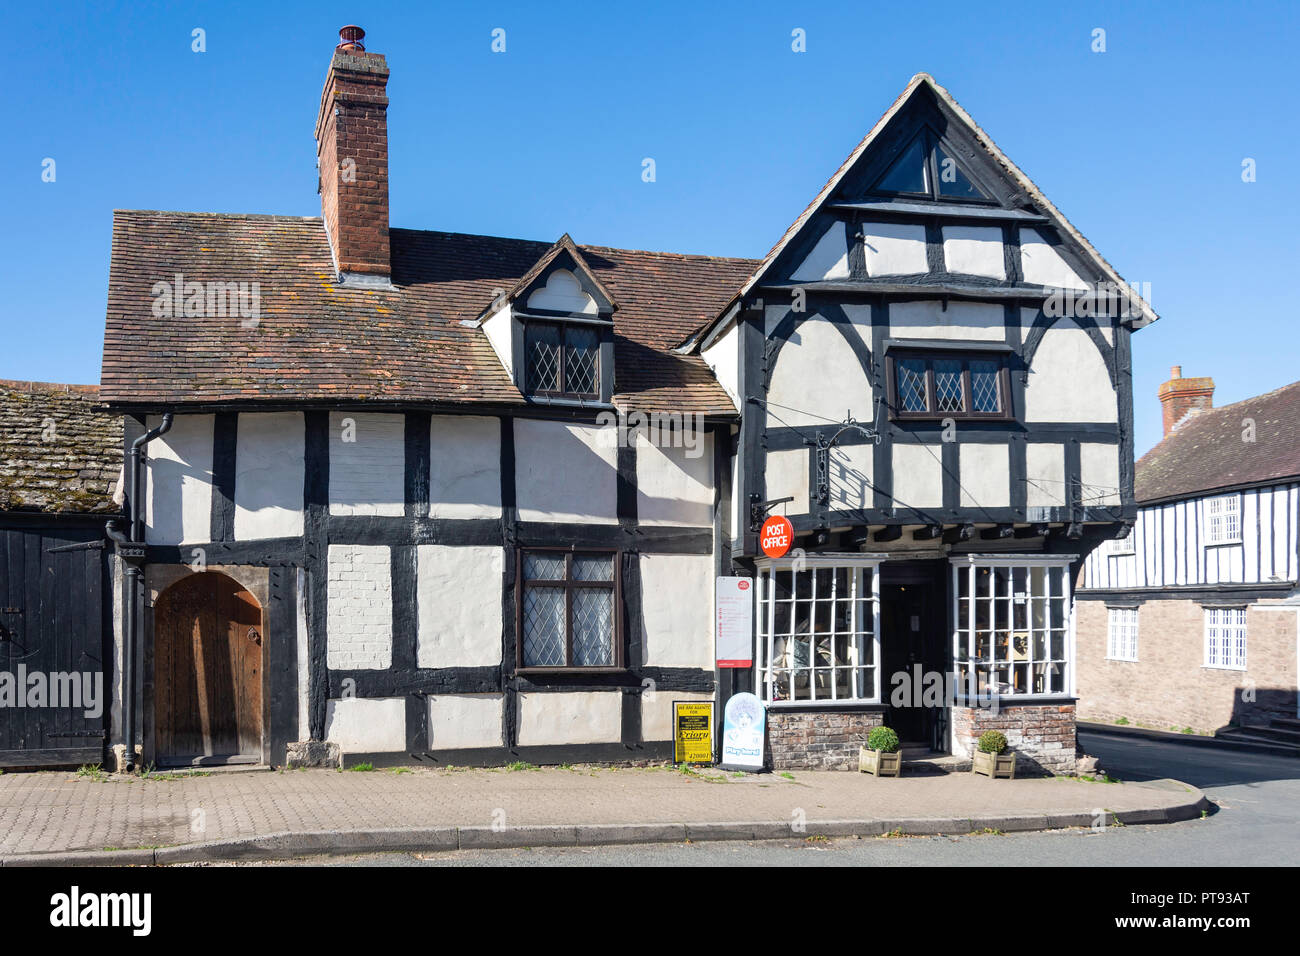 Ancient 'black and white' building, High Street, Weobley, Herefordshire, England, United Kingdom Stock Photo